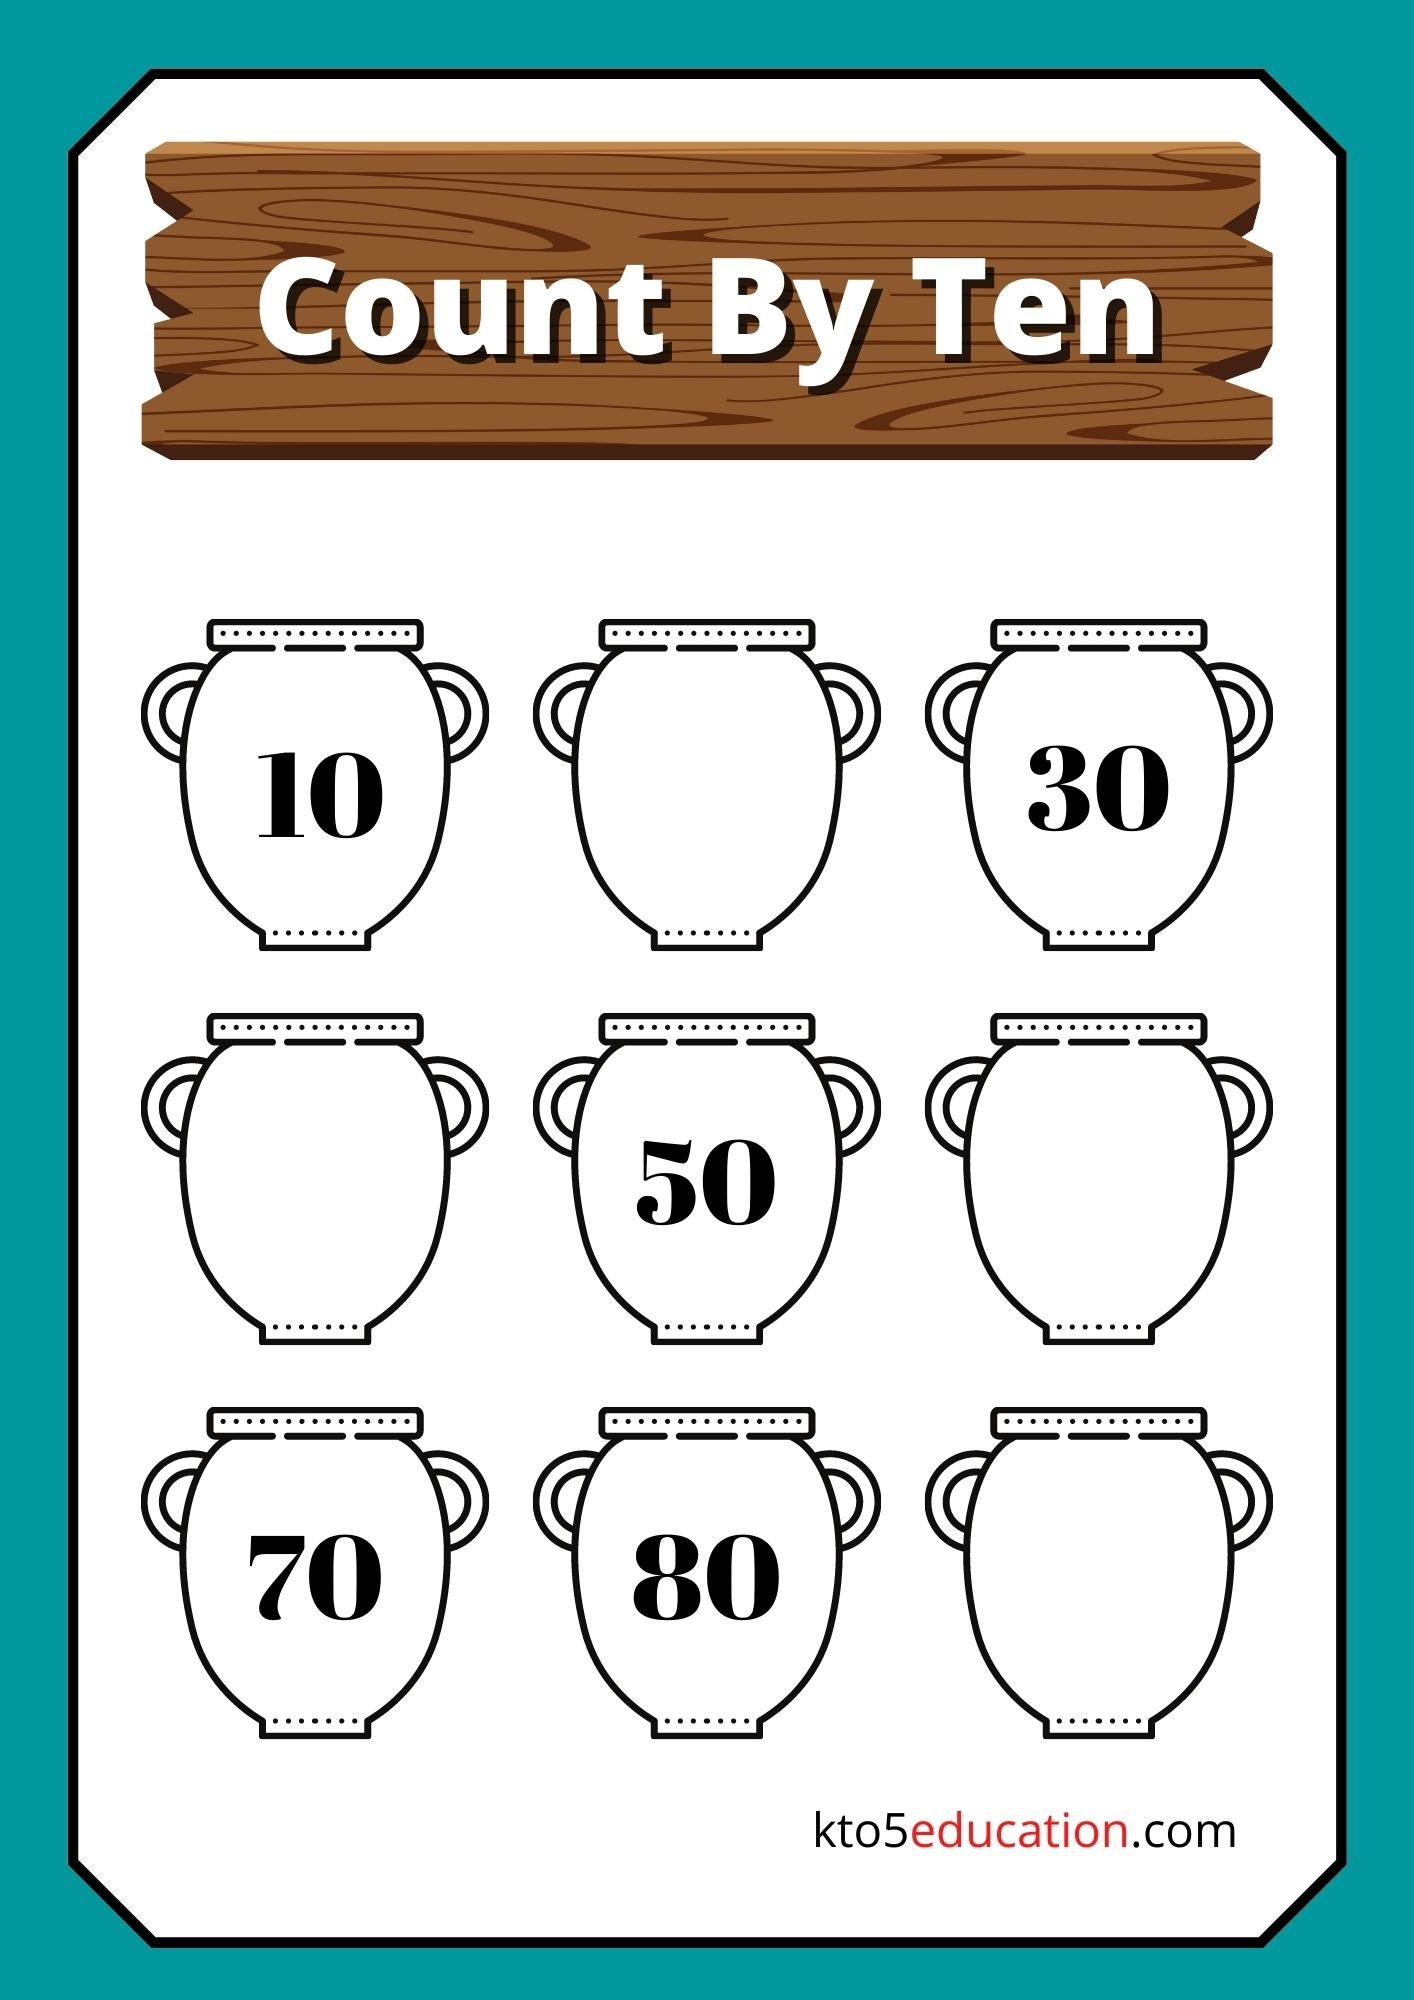 Count By Ten Worksheets For Third Grade